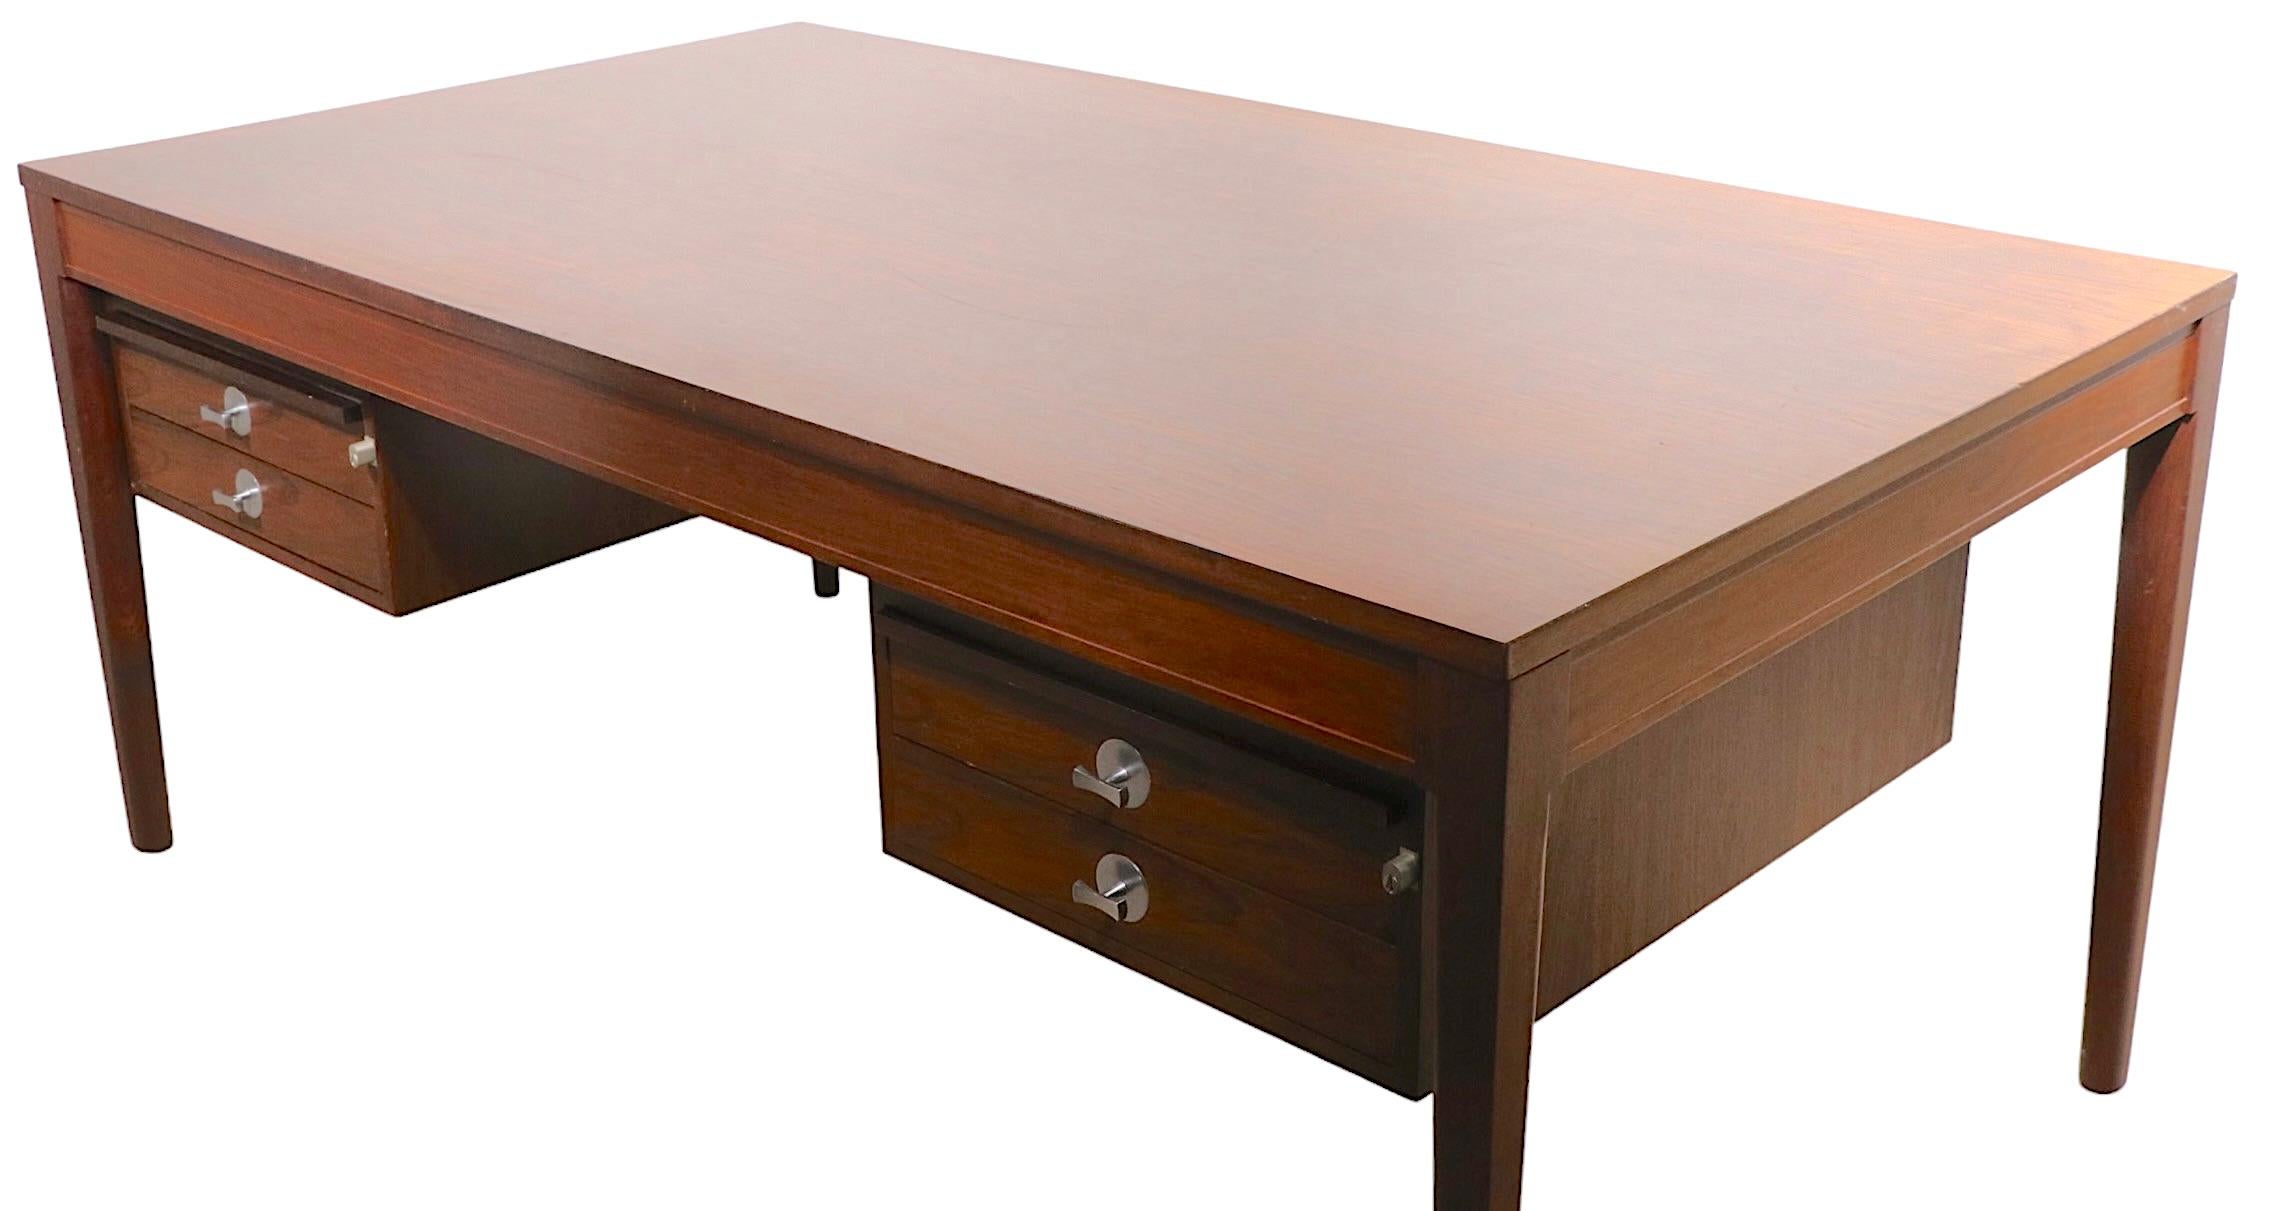 Large rosewood executive Diplomat model desk, model FD-951, designed by Finn Juhl, made by France & Son circa 1960. This classic desk features two banks of locking drawers, each with two drawers, and pull out glass top writing surfaces. This example